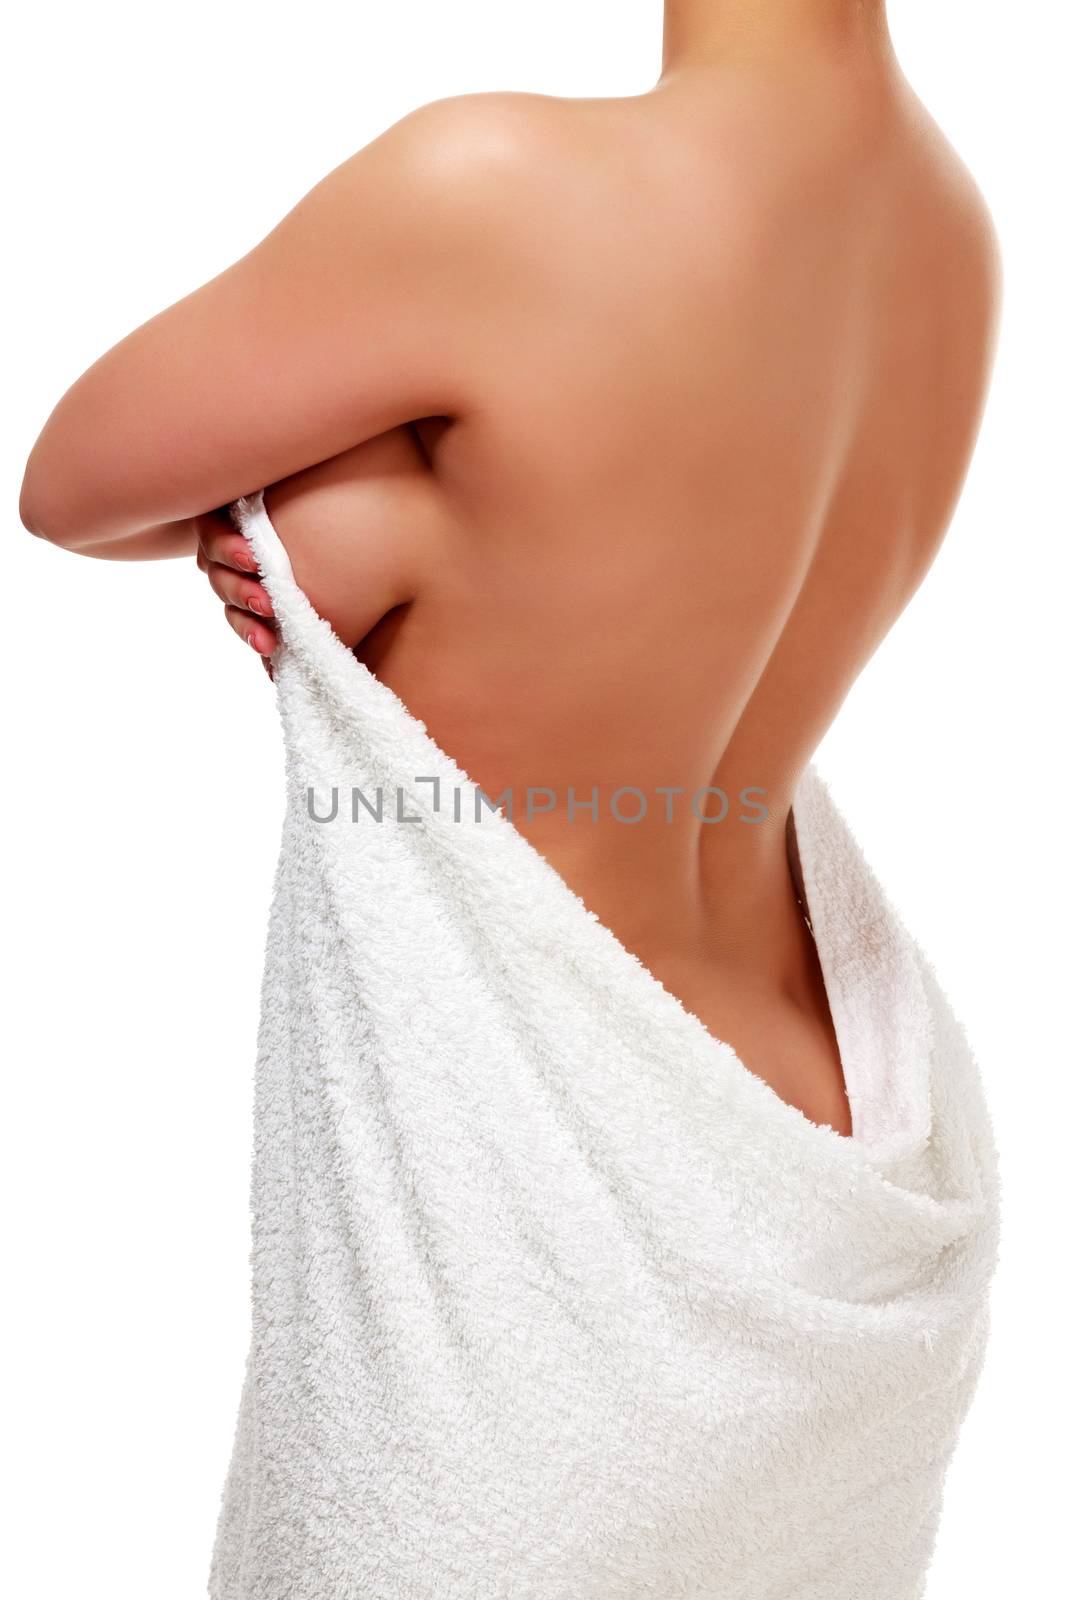 Woman in white towel by Nobilior